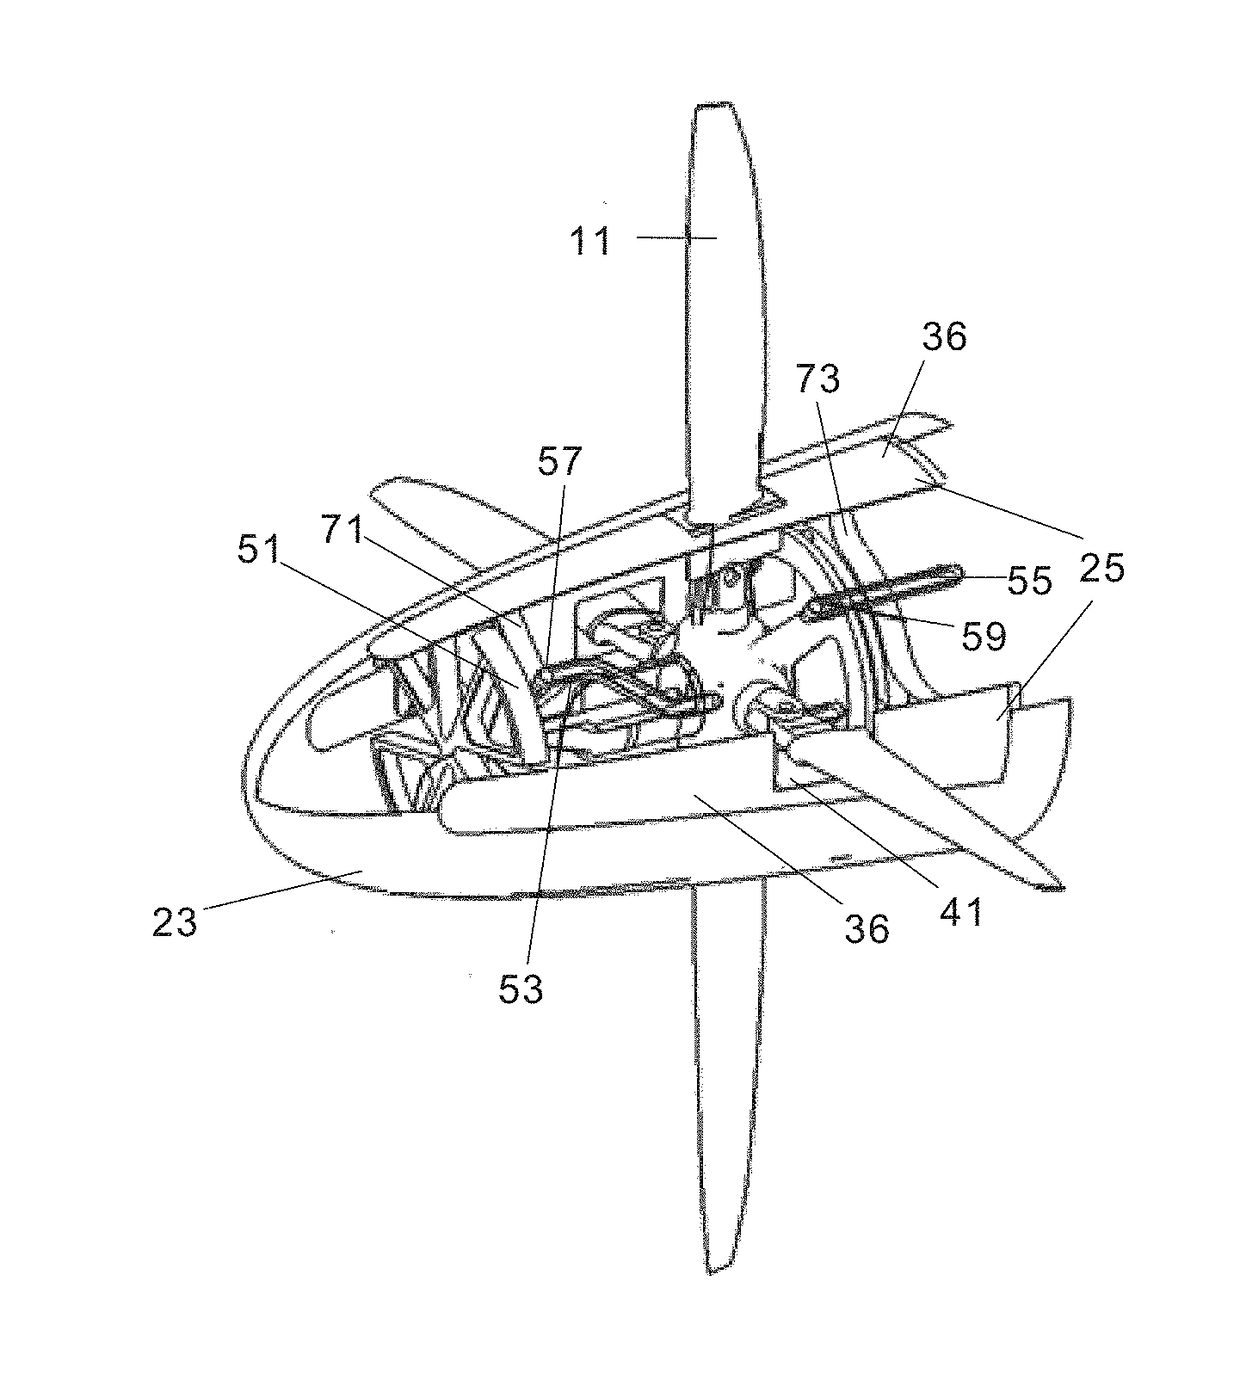 Propeller device for aircraft, spacecraft or watercraft